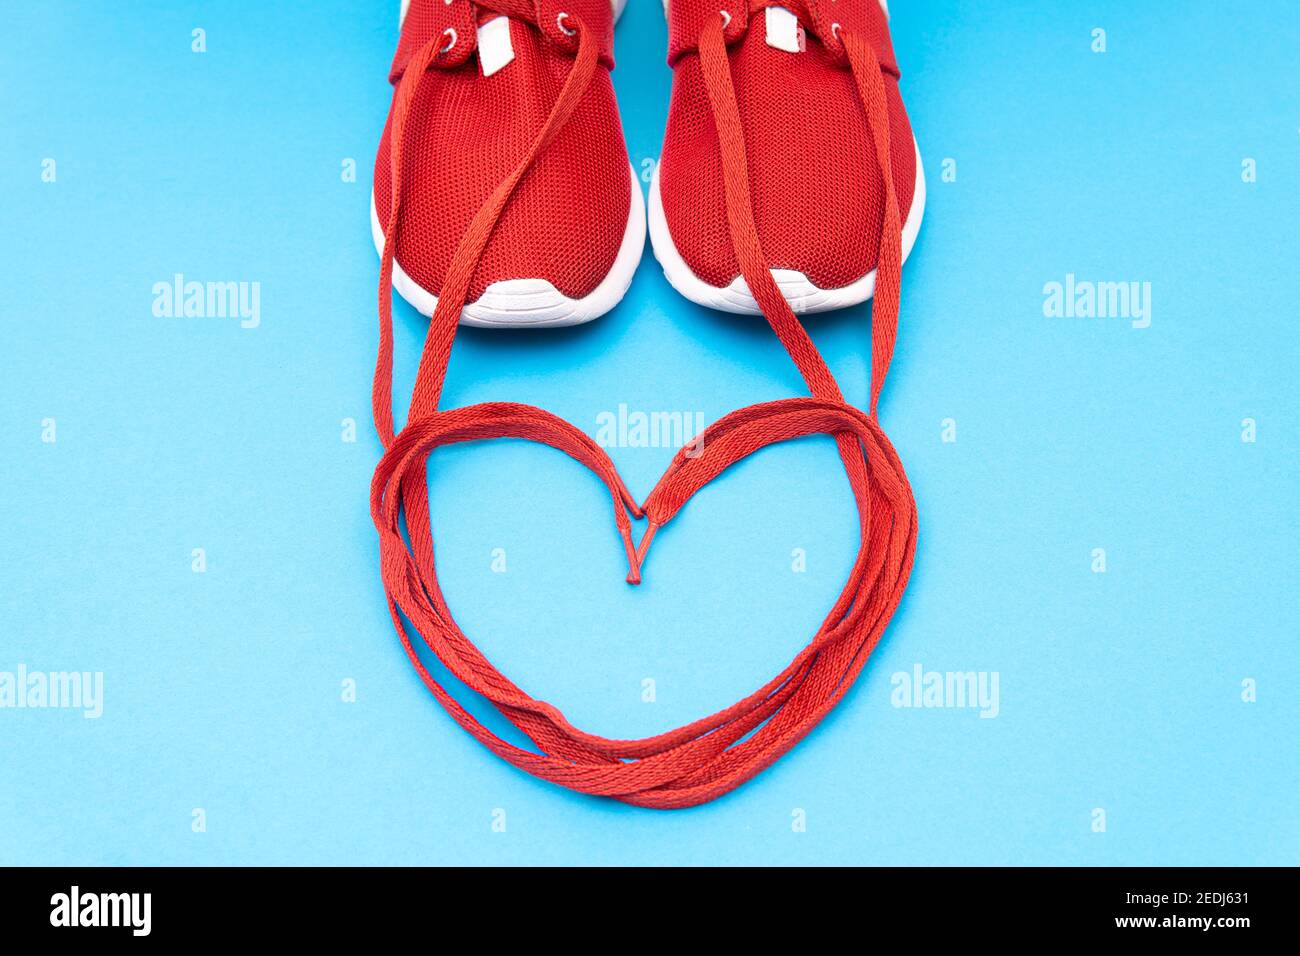 Crop view of red athletic sneakers and a heart symbol made of the shoelaces on a blue background. Running passion creative concept. Stock Photo